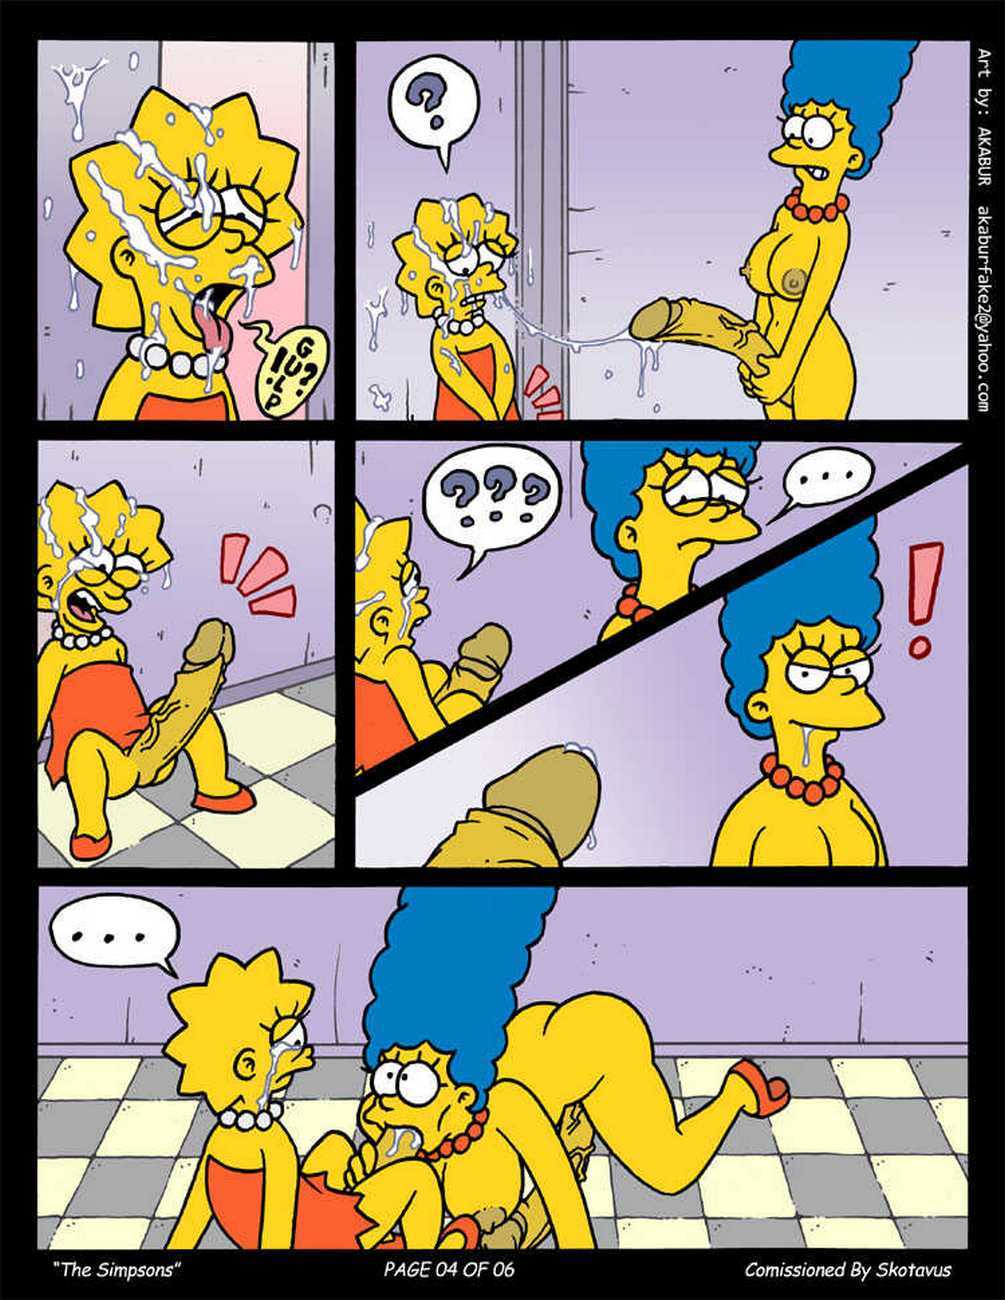 The Simpsons page 5